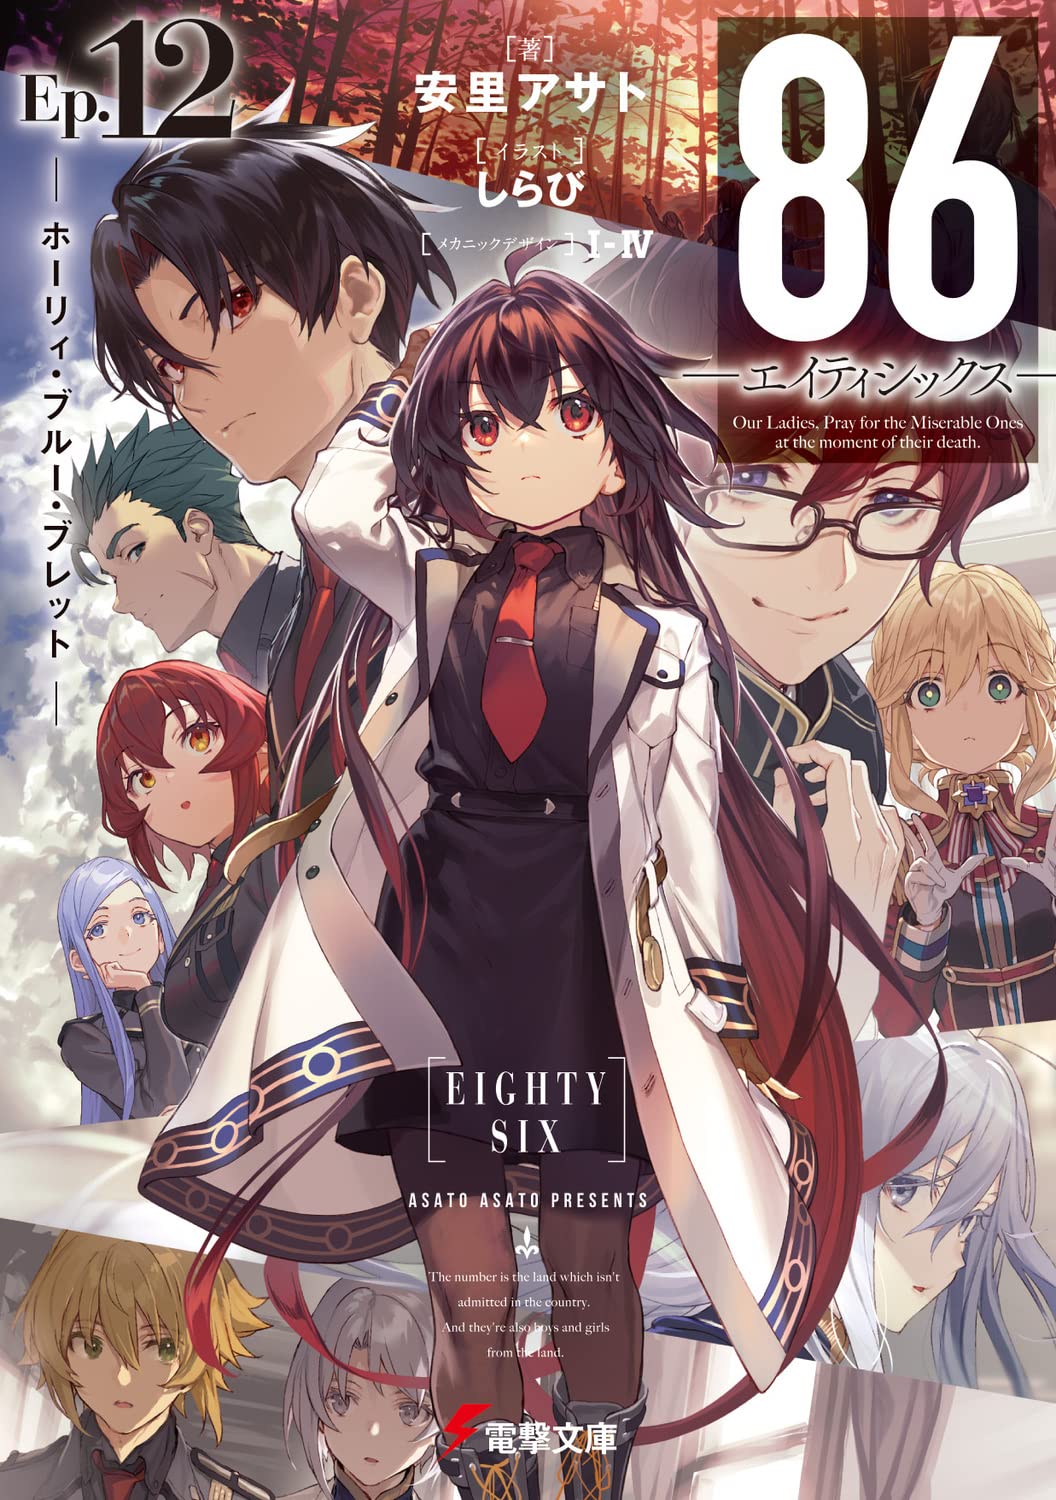 I just found out there is a spin off manga 86 Eightysix operation